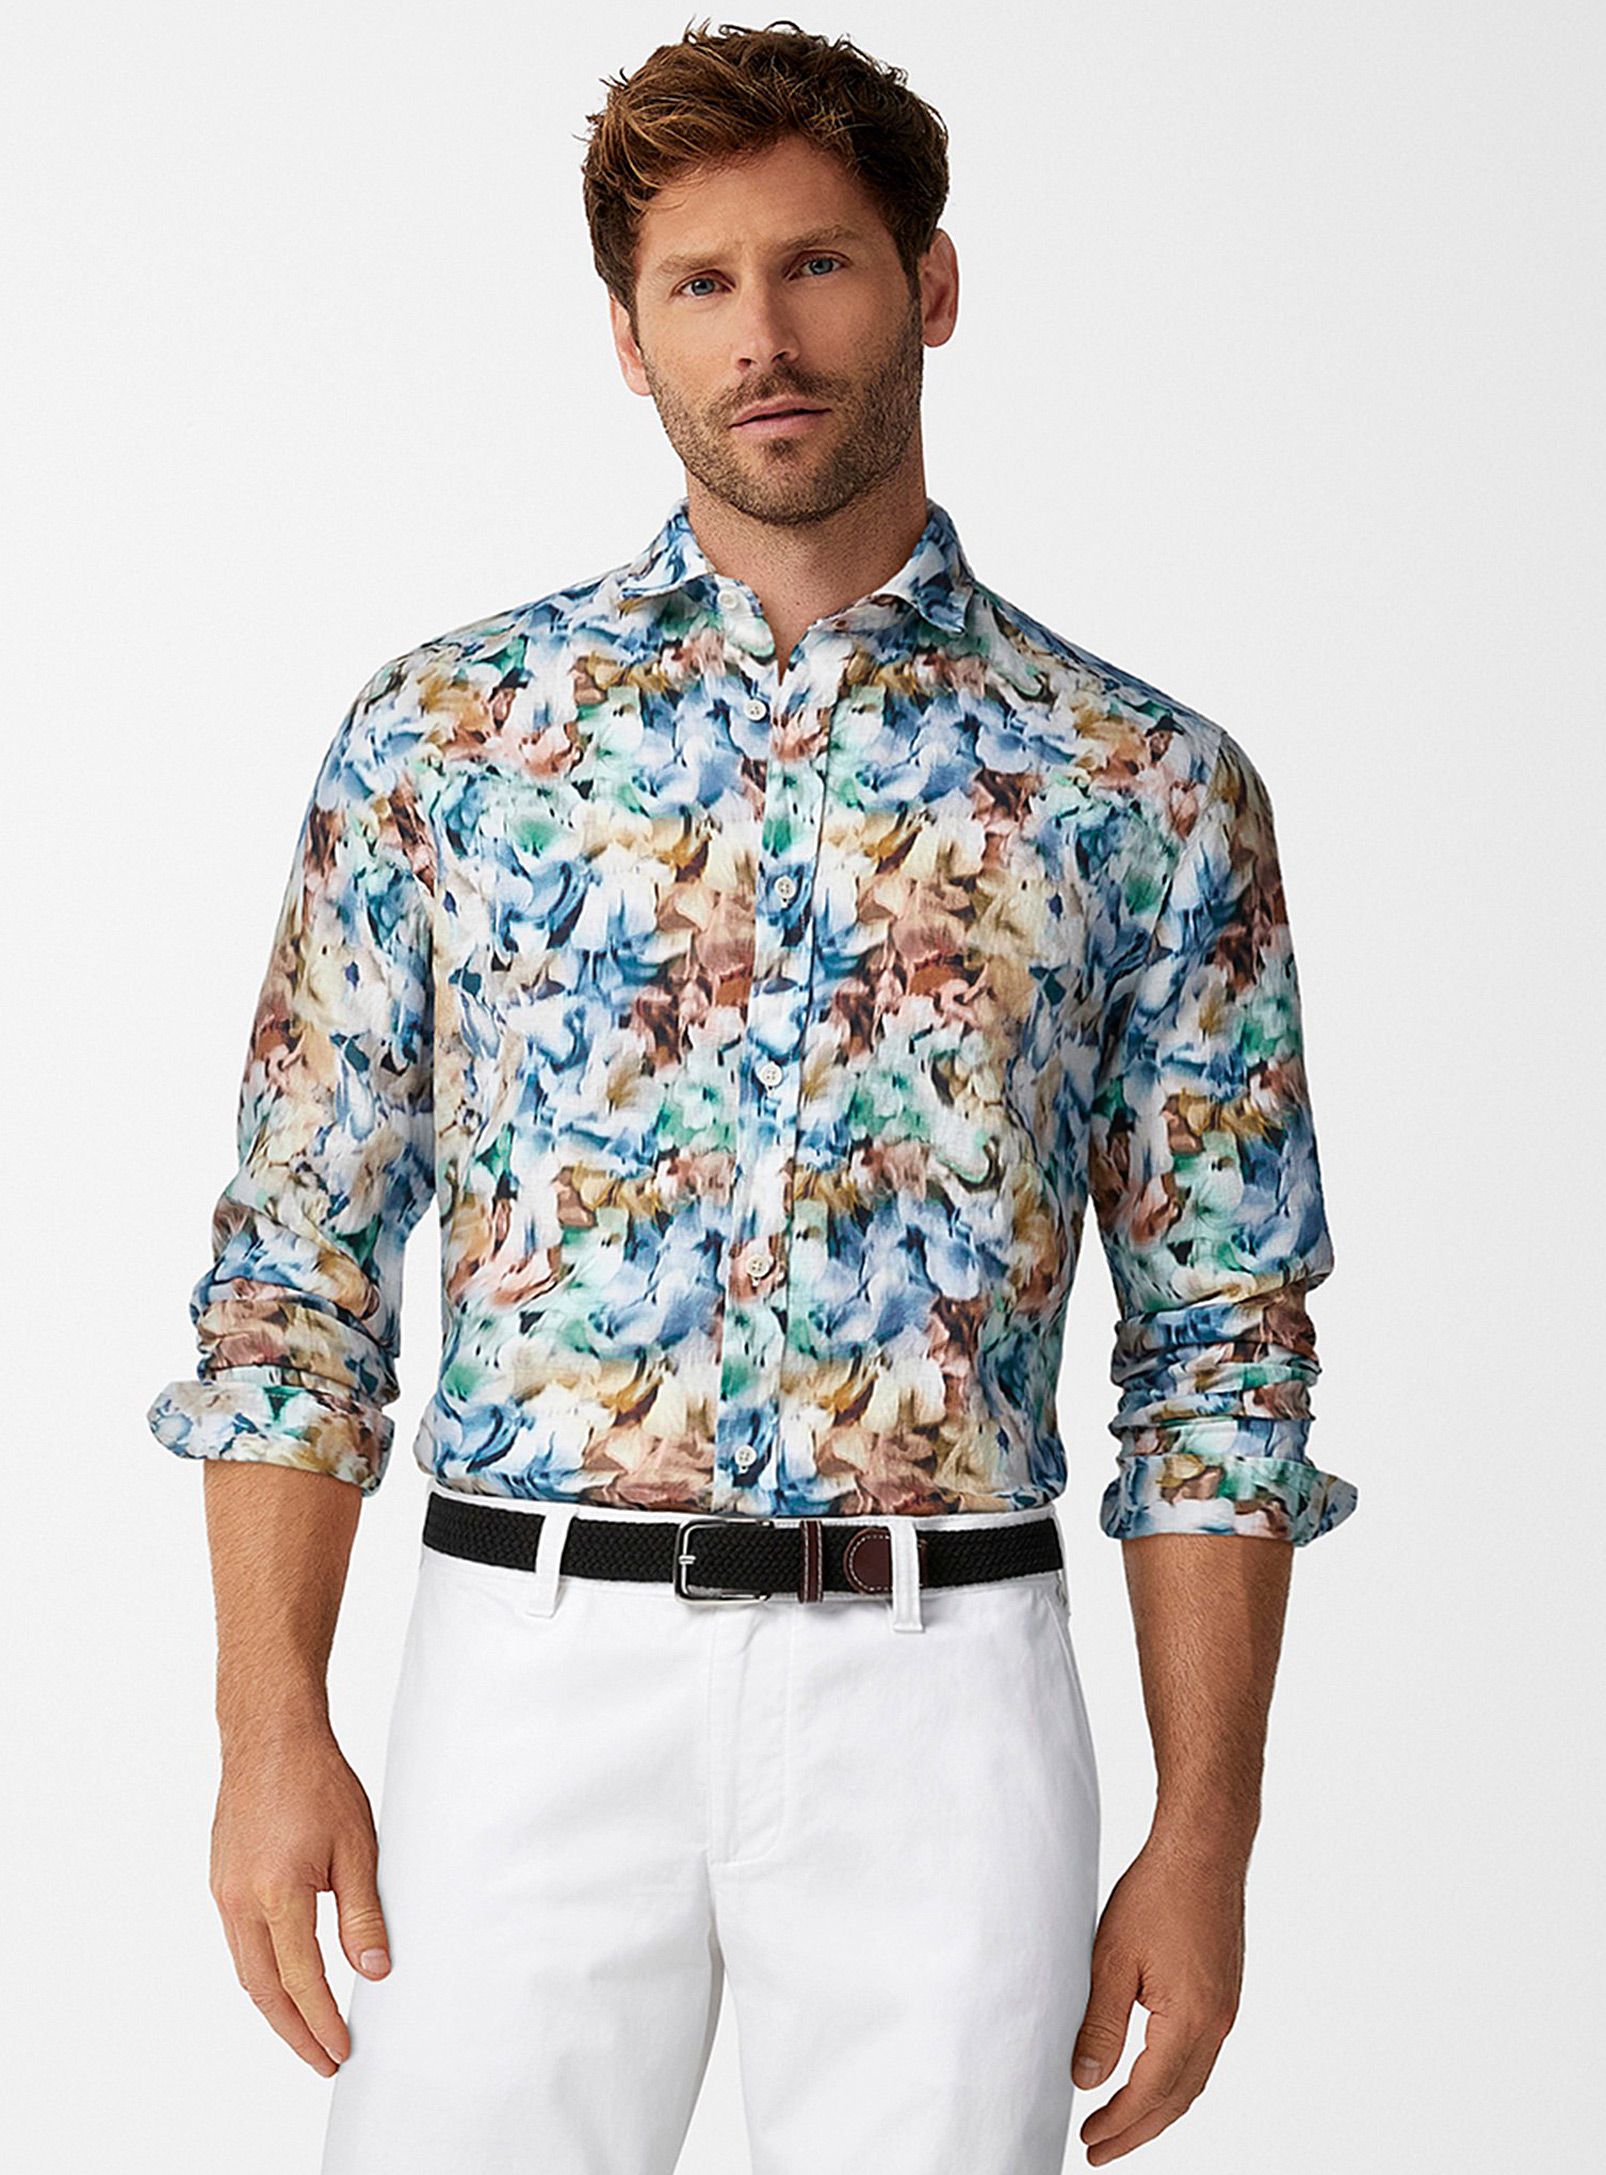 Olymp - La chemise pur lin abstraction florale